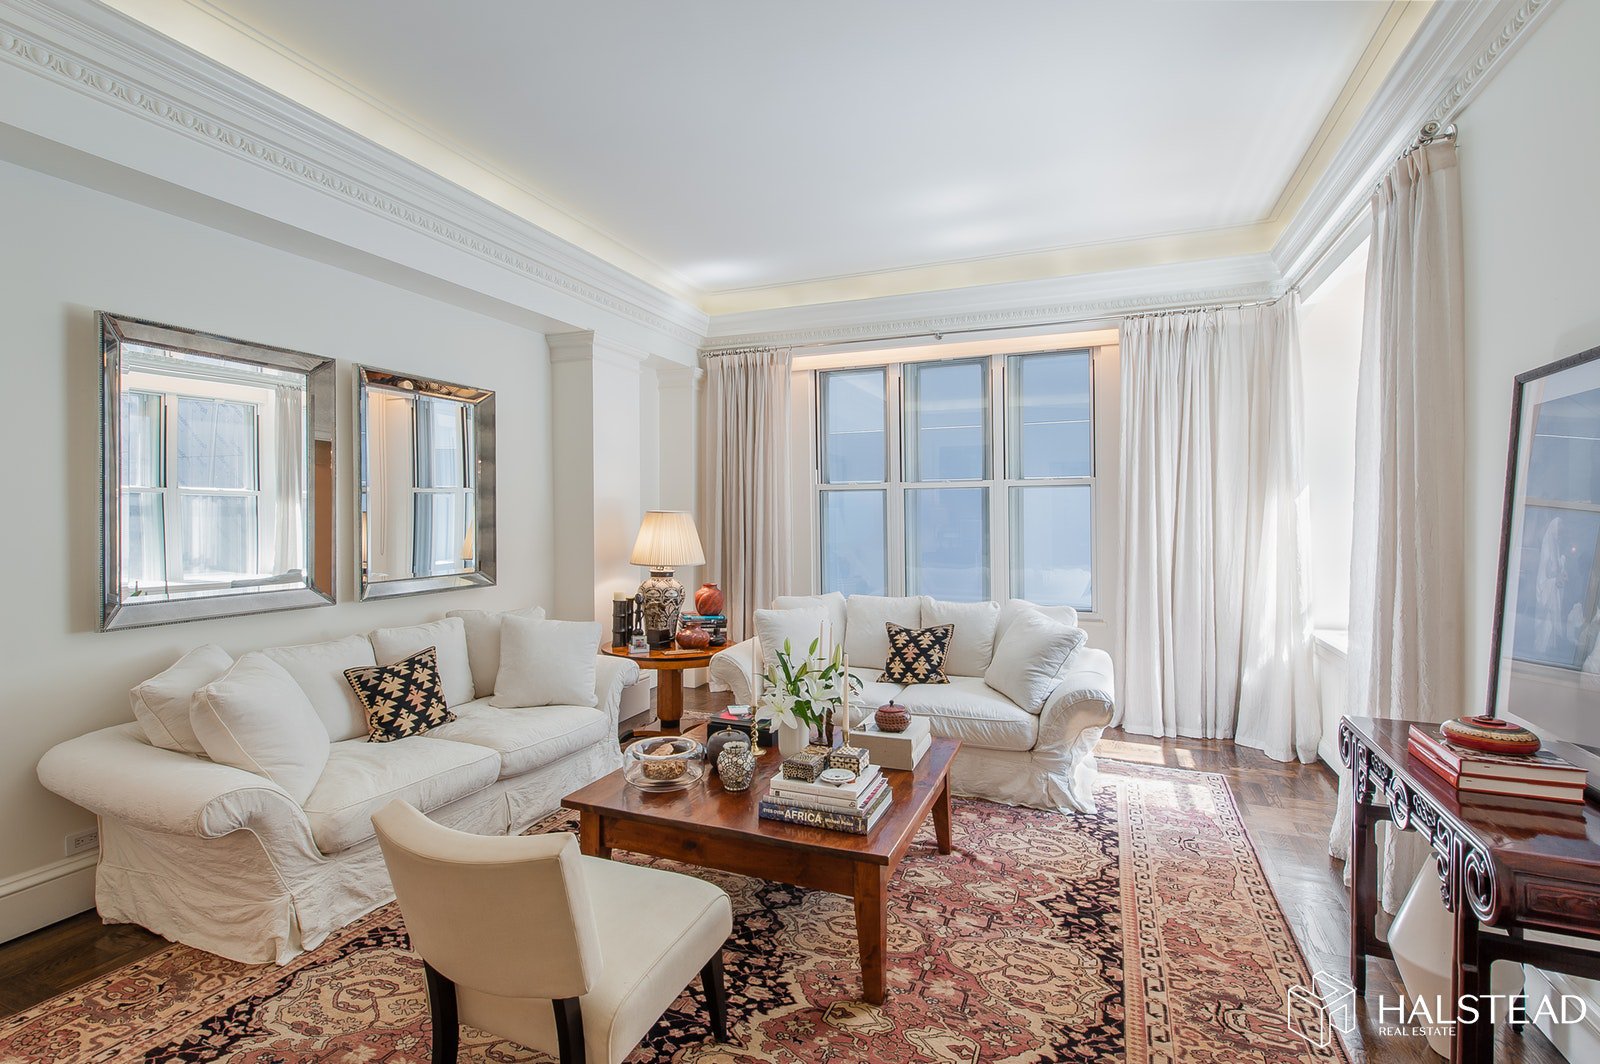 The Alwyn Court 180 W 58TH ST Apartments for Sale Rent in Midtown